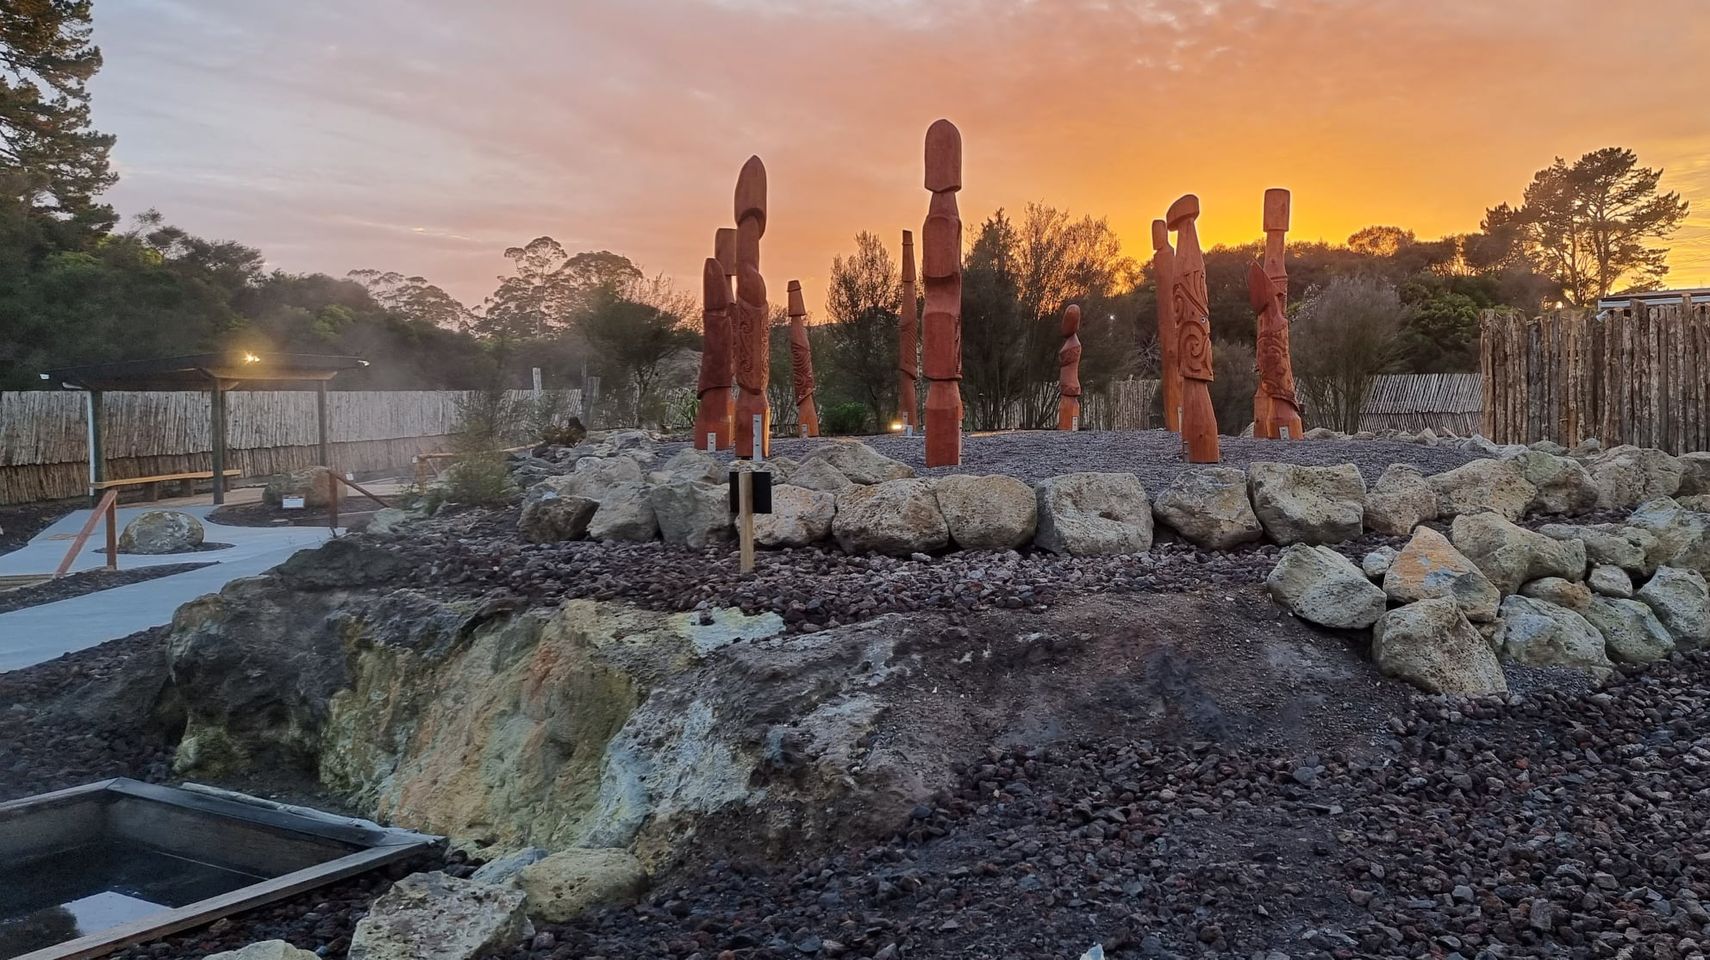 Māori carved figures standing in a circle outside, with rocks and steam from natural hot springs surrounding